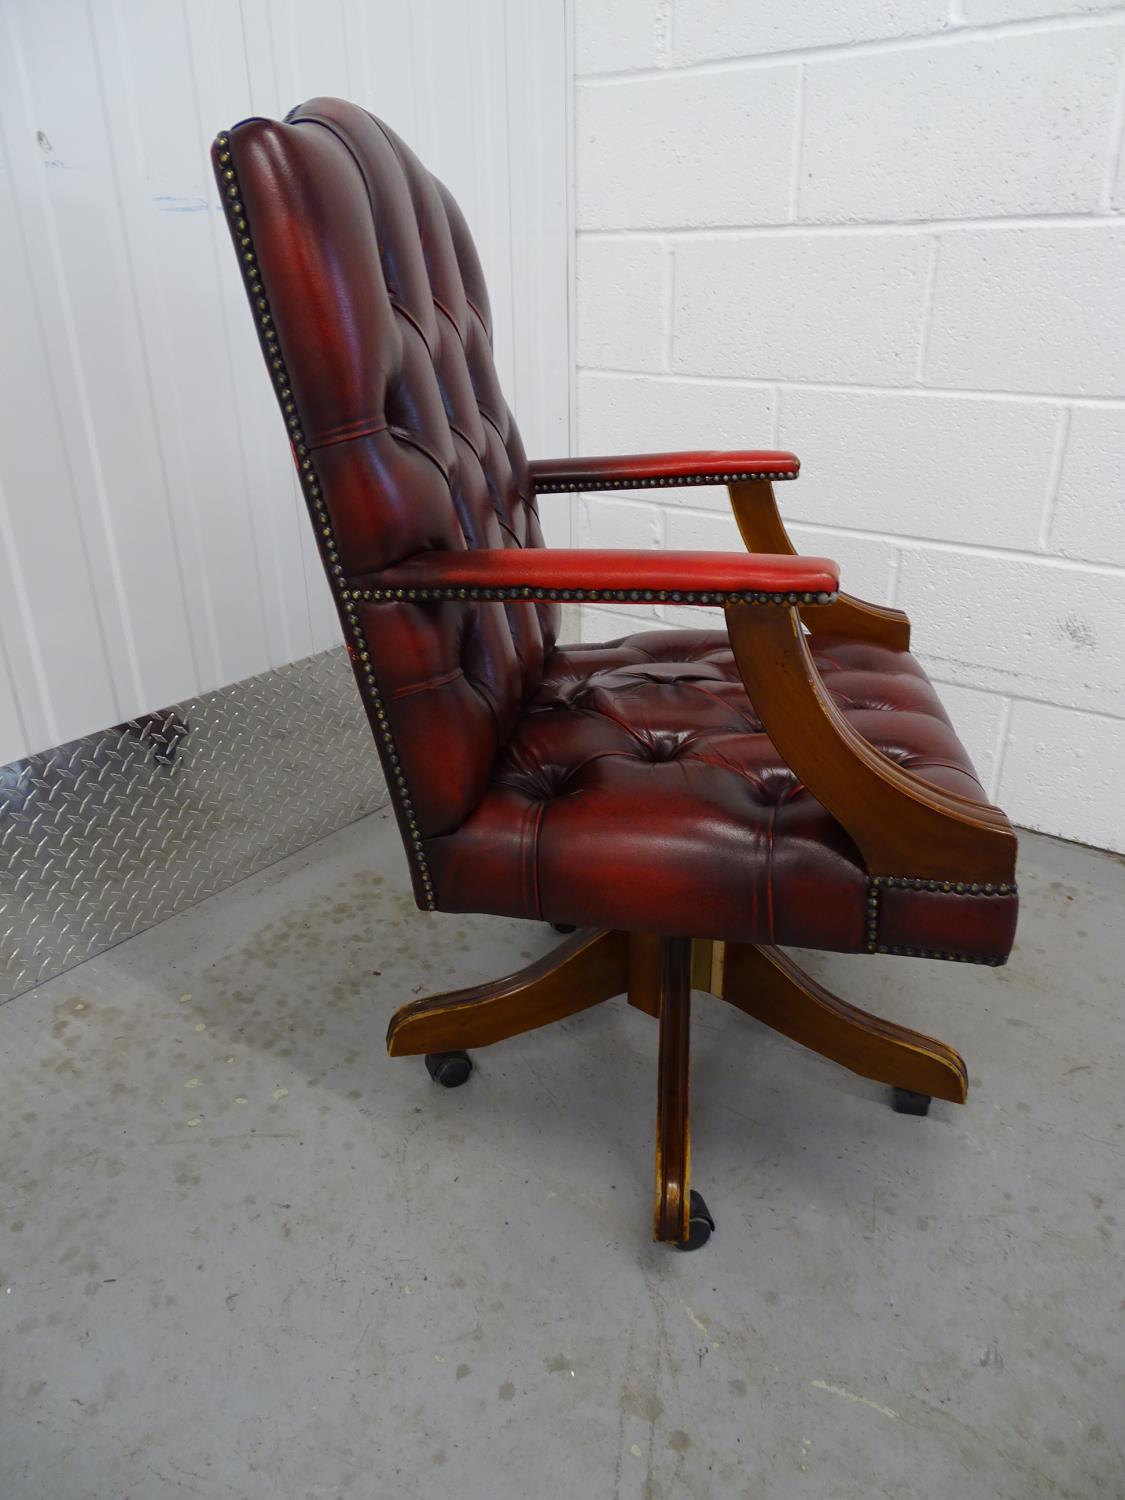 Leather Chair - a Sang de Beouf Leather button back , open arm, swivel office chair with 5 spoke